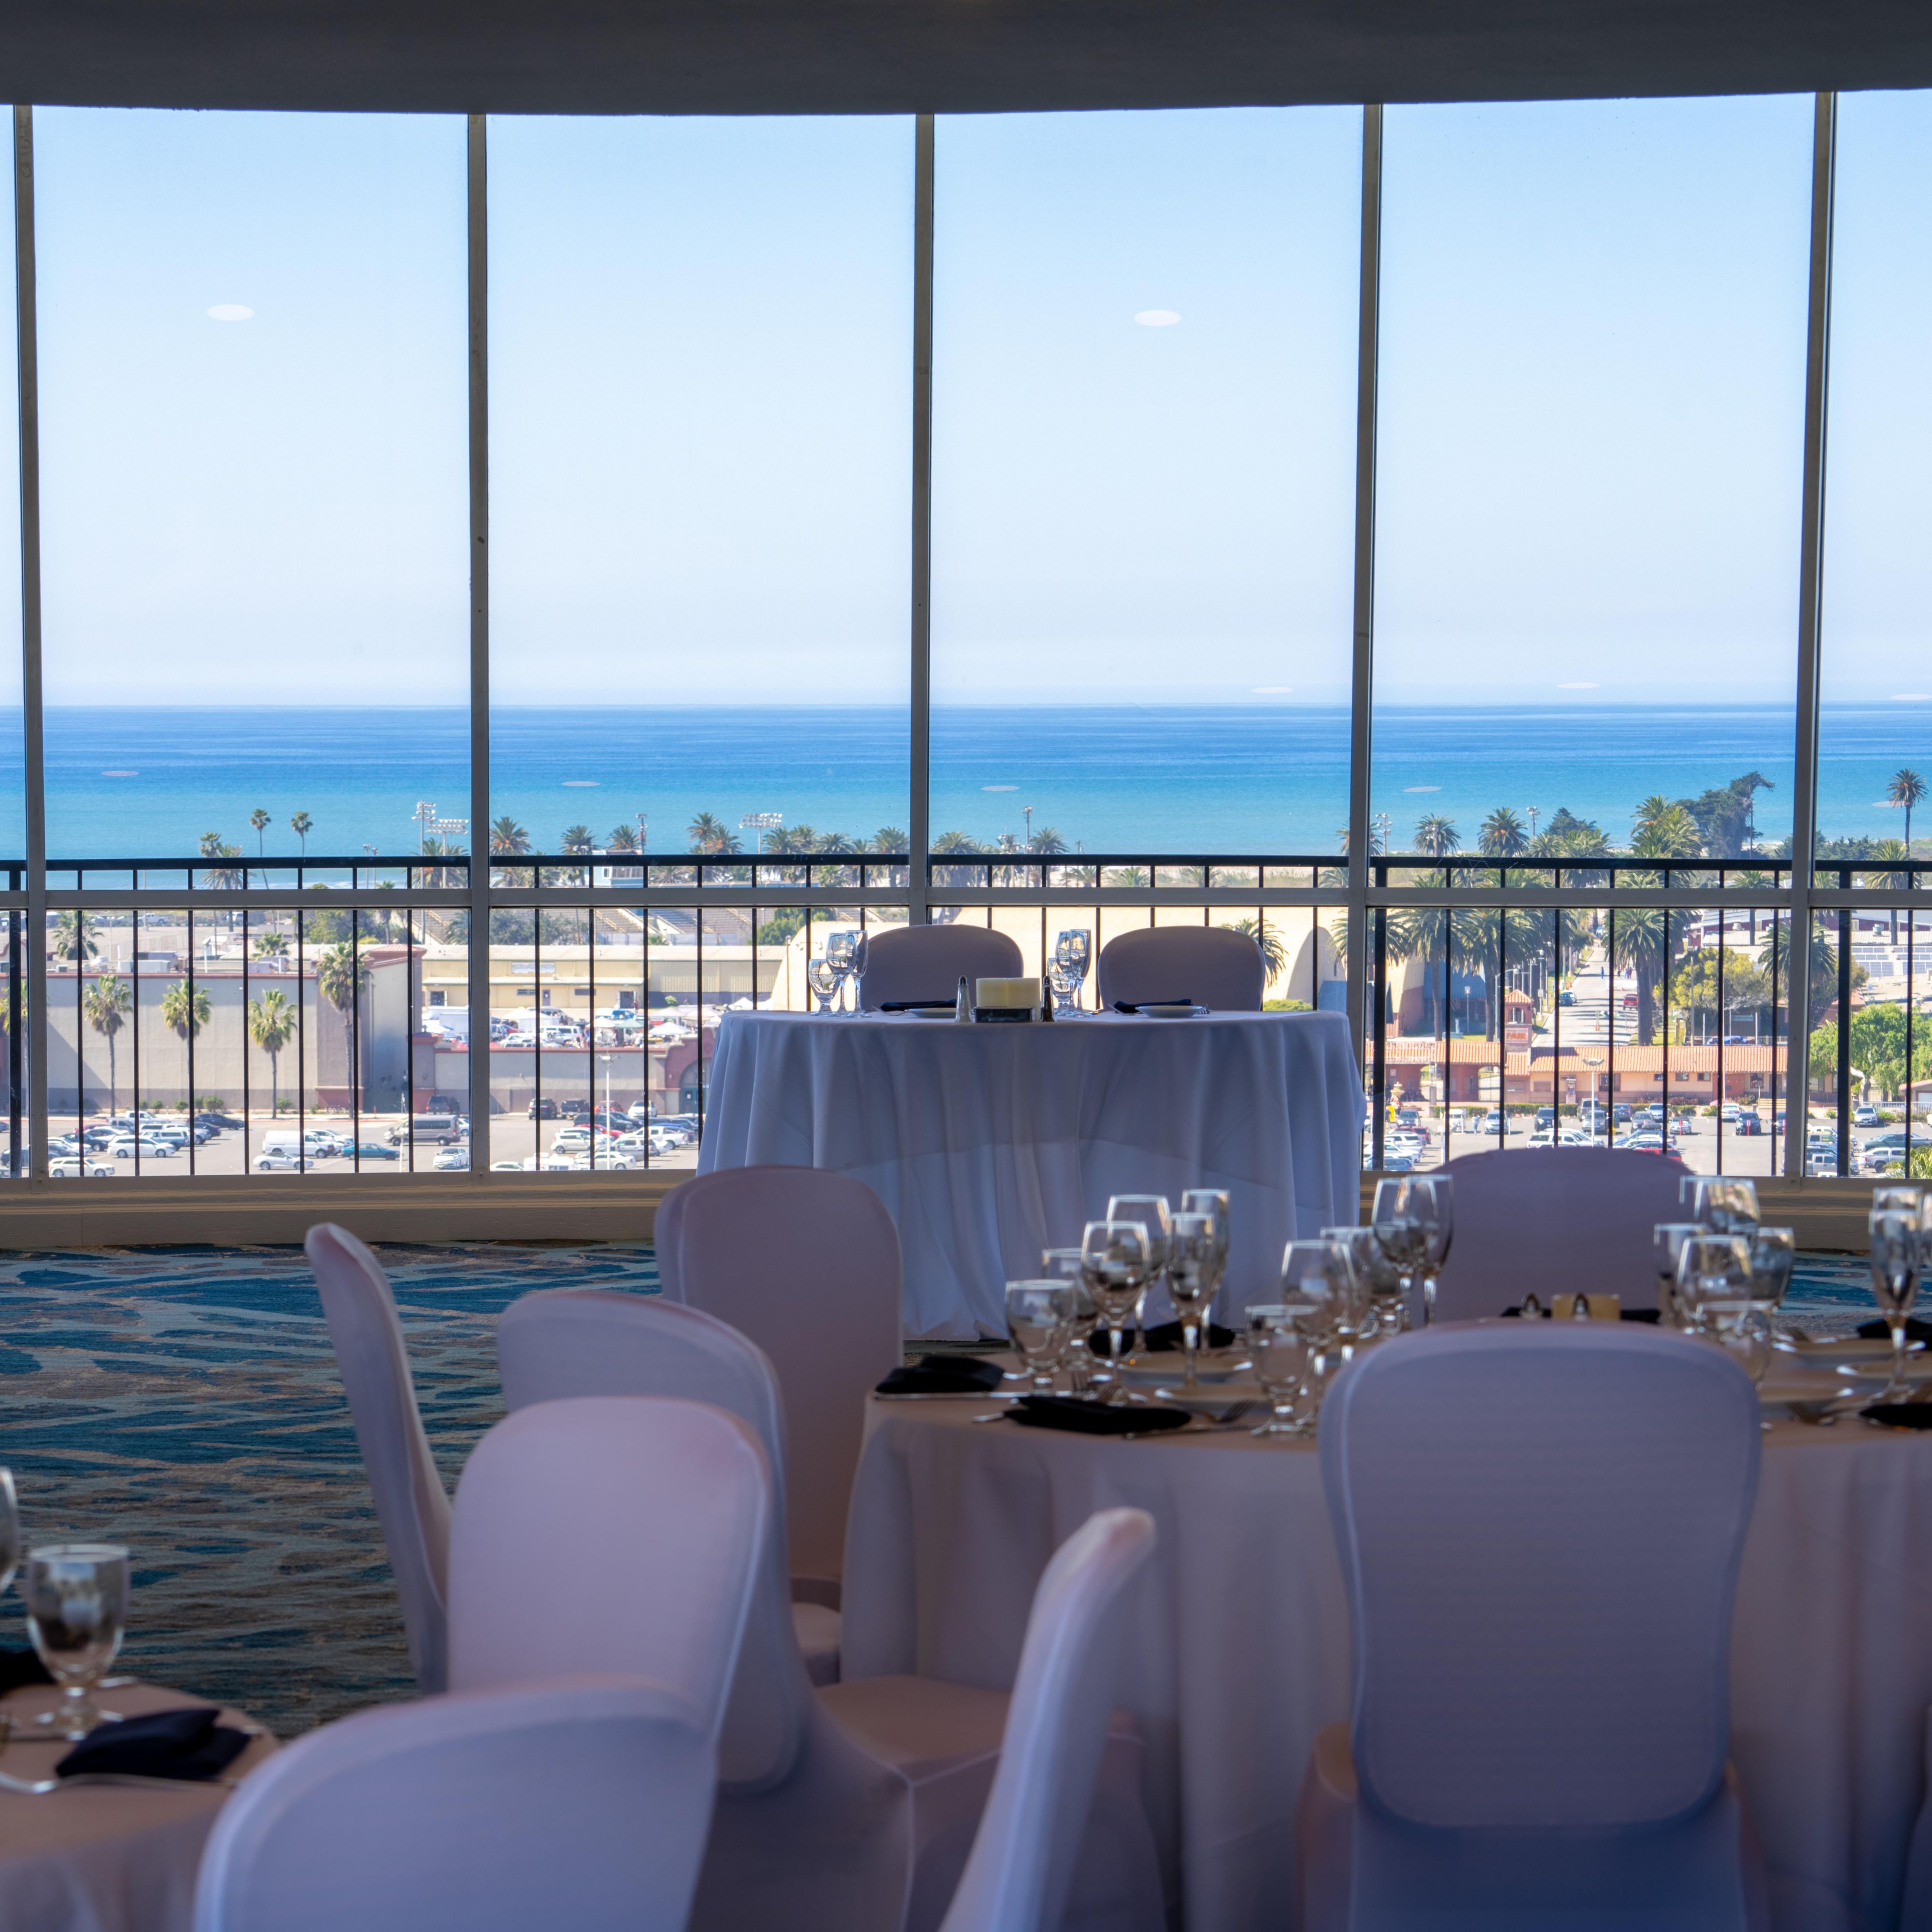 Top of the Harbor Ballroom with 280 degrees of ocean view